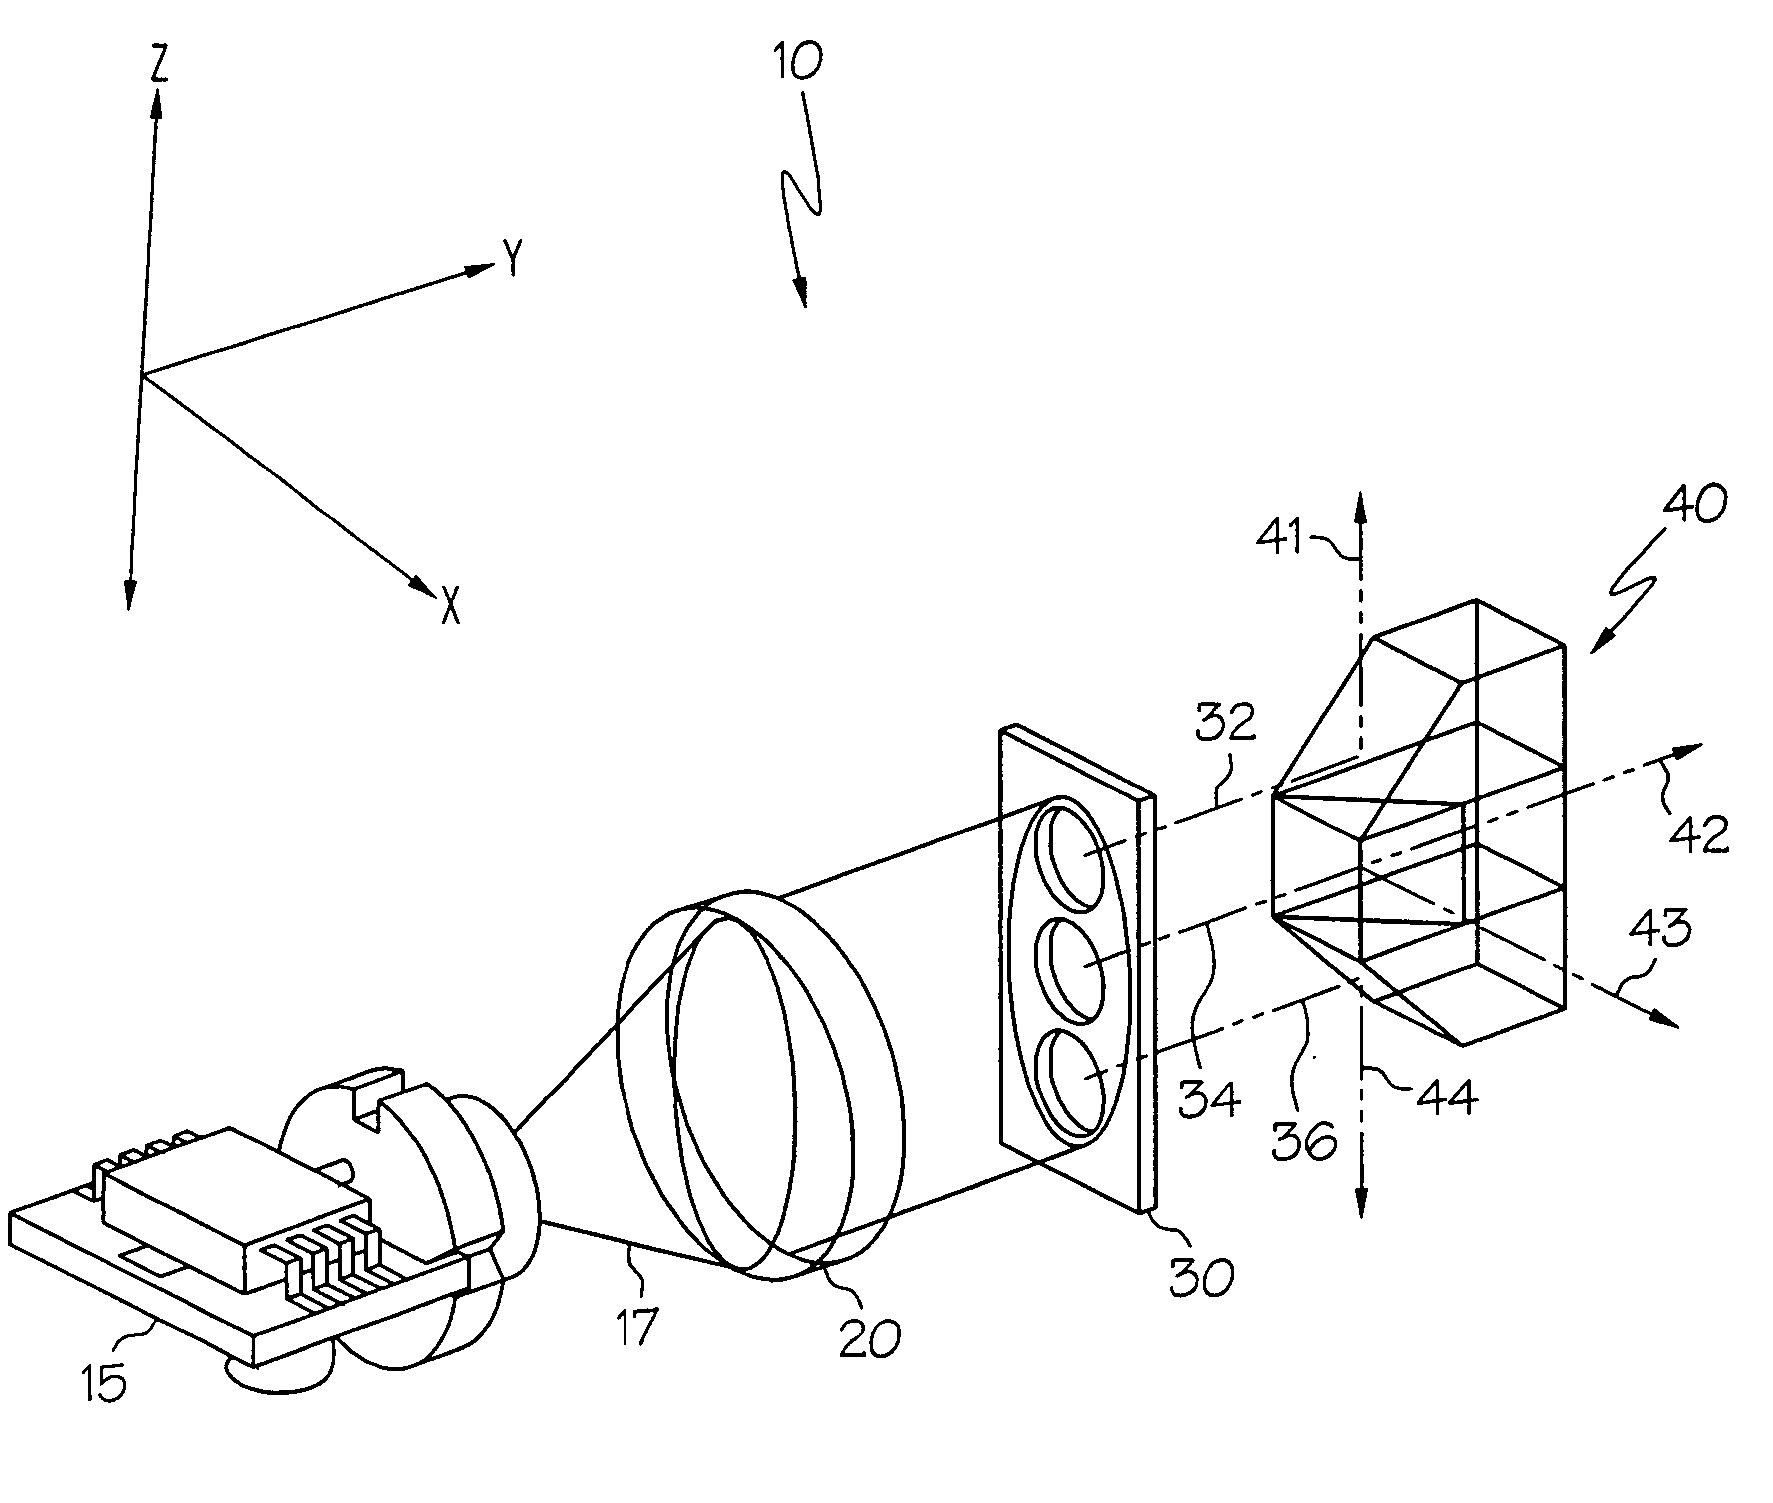 Optical system providing four beams from a single source